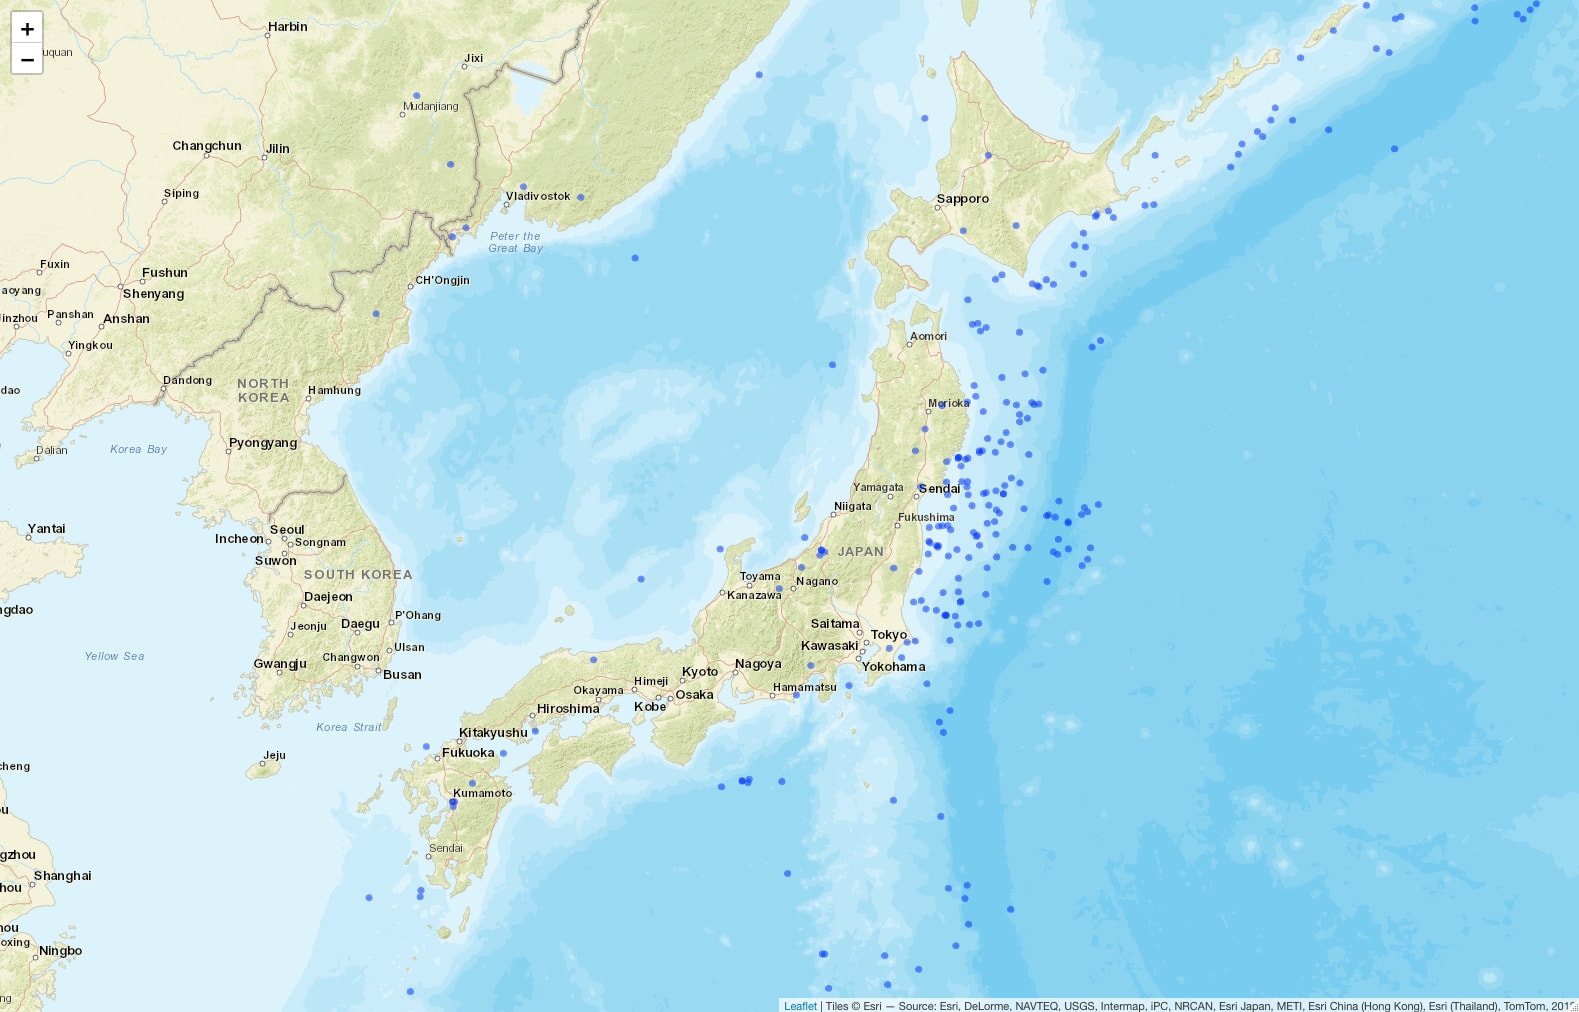 Image 3 - Geomap of Earthquakes near Japan from 2001 to 2018 